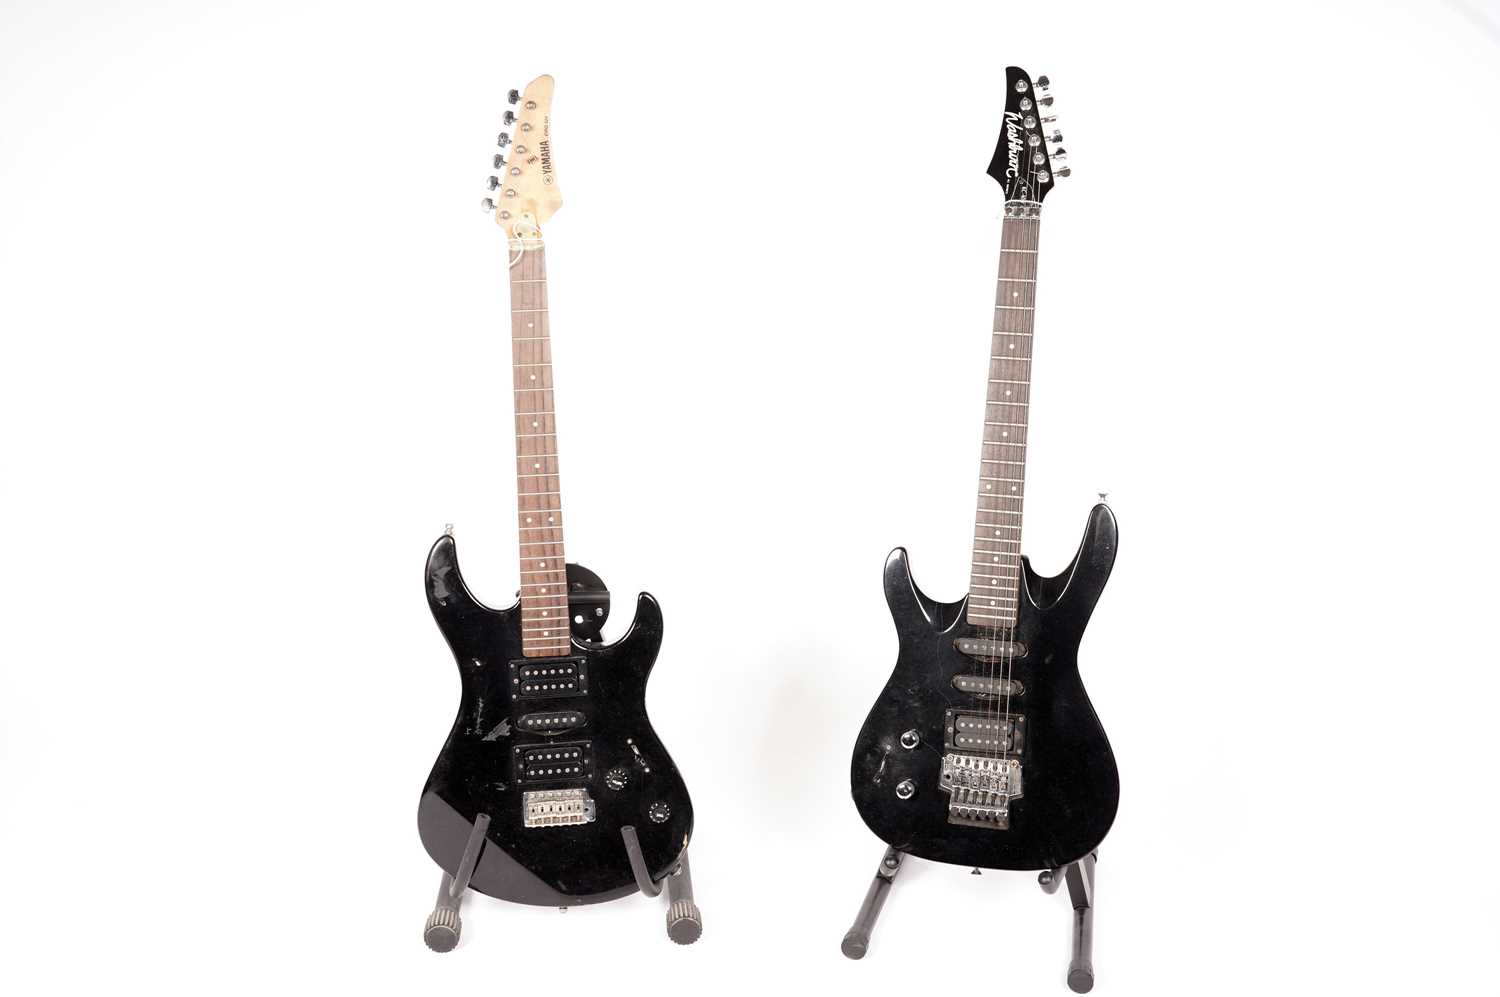 Two black electric guitars